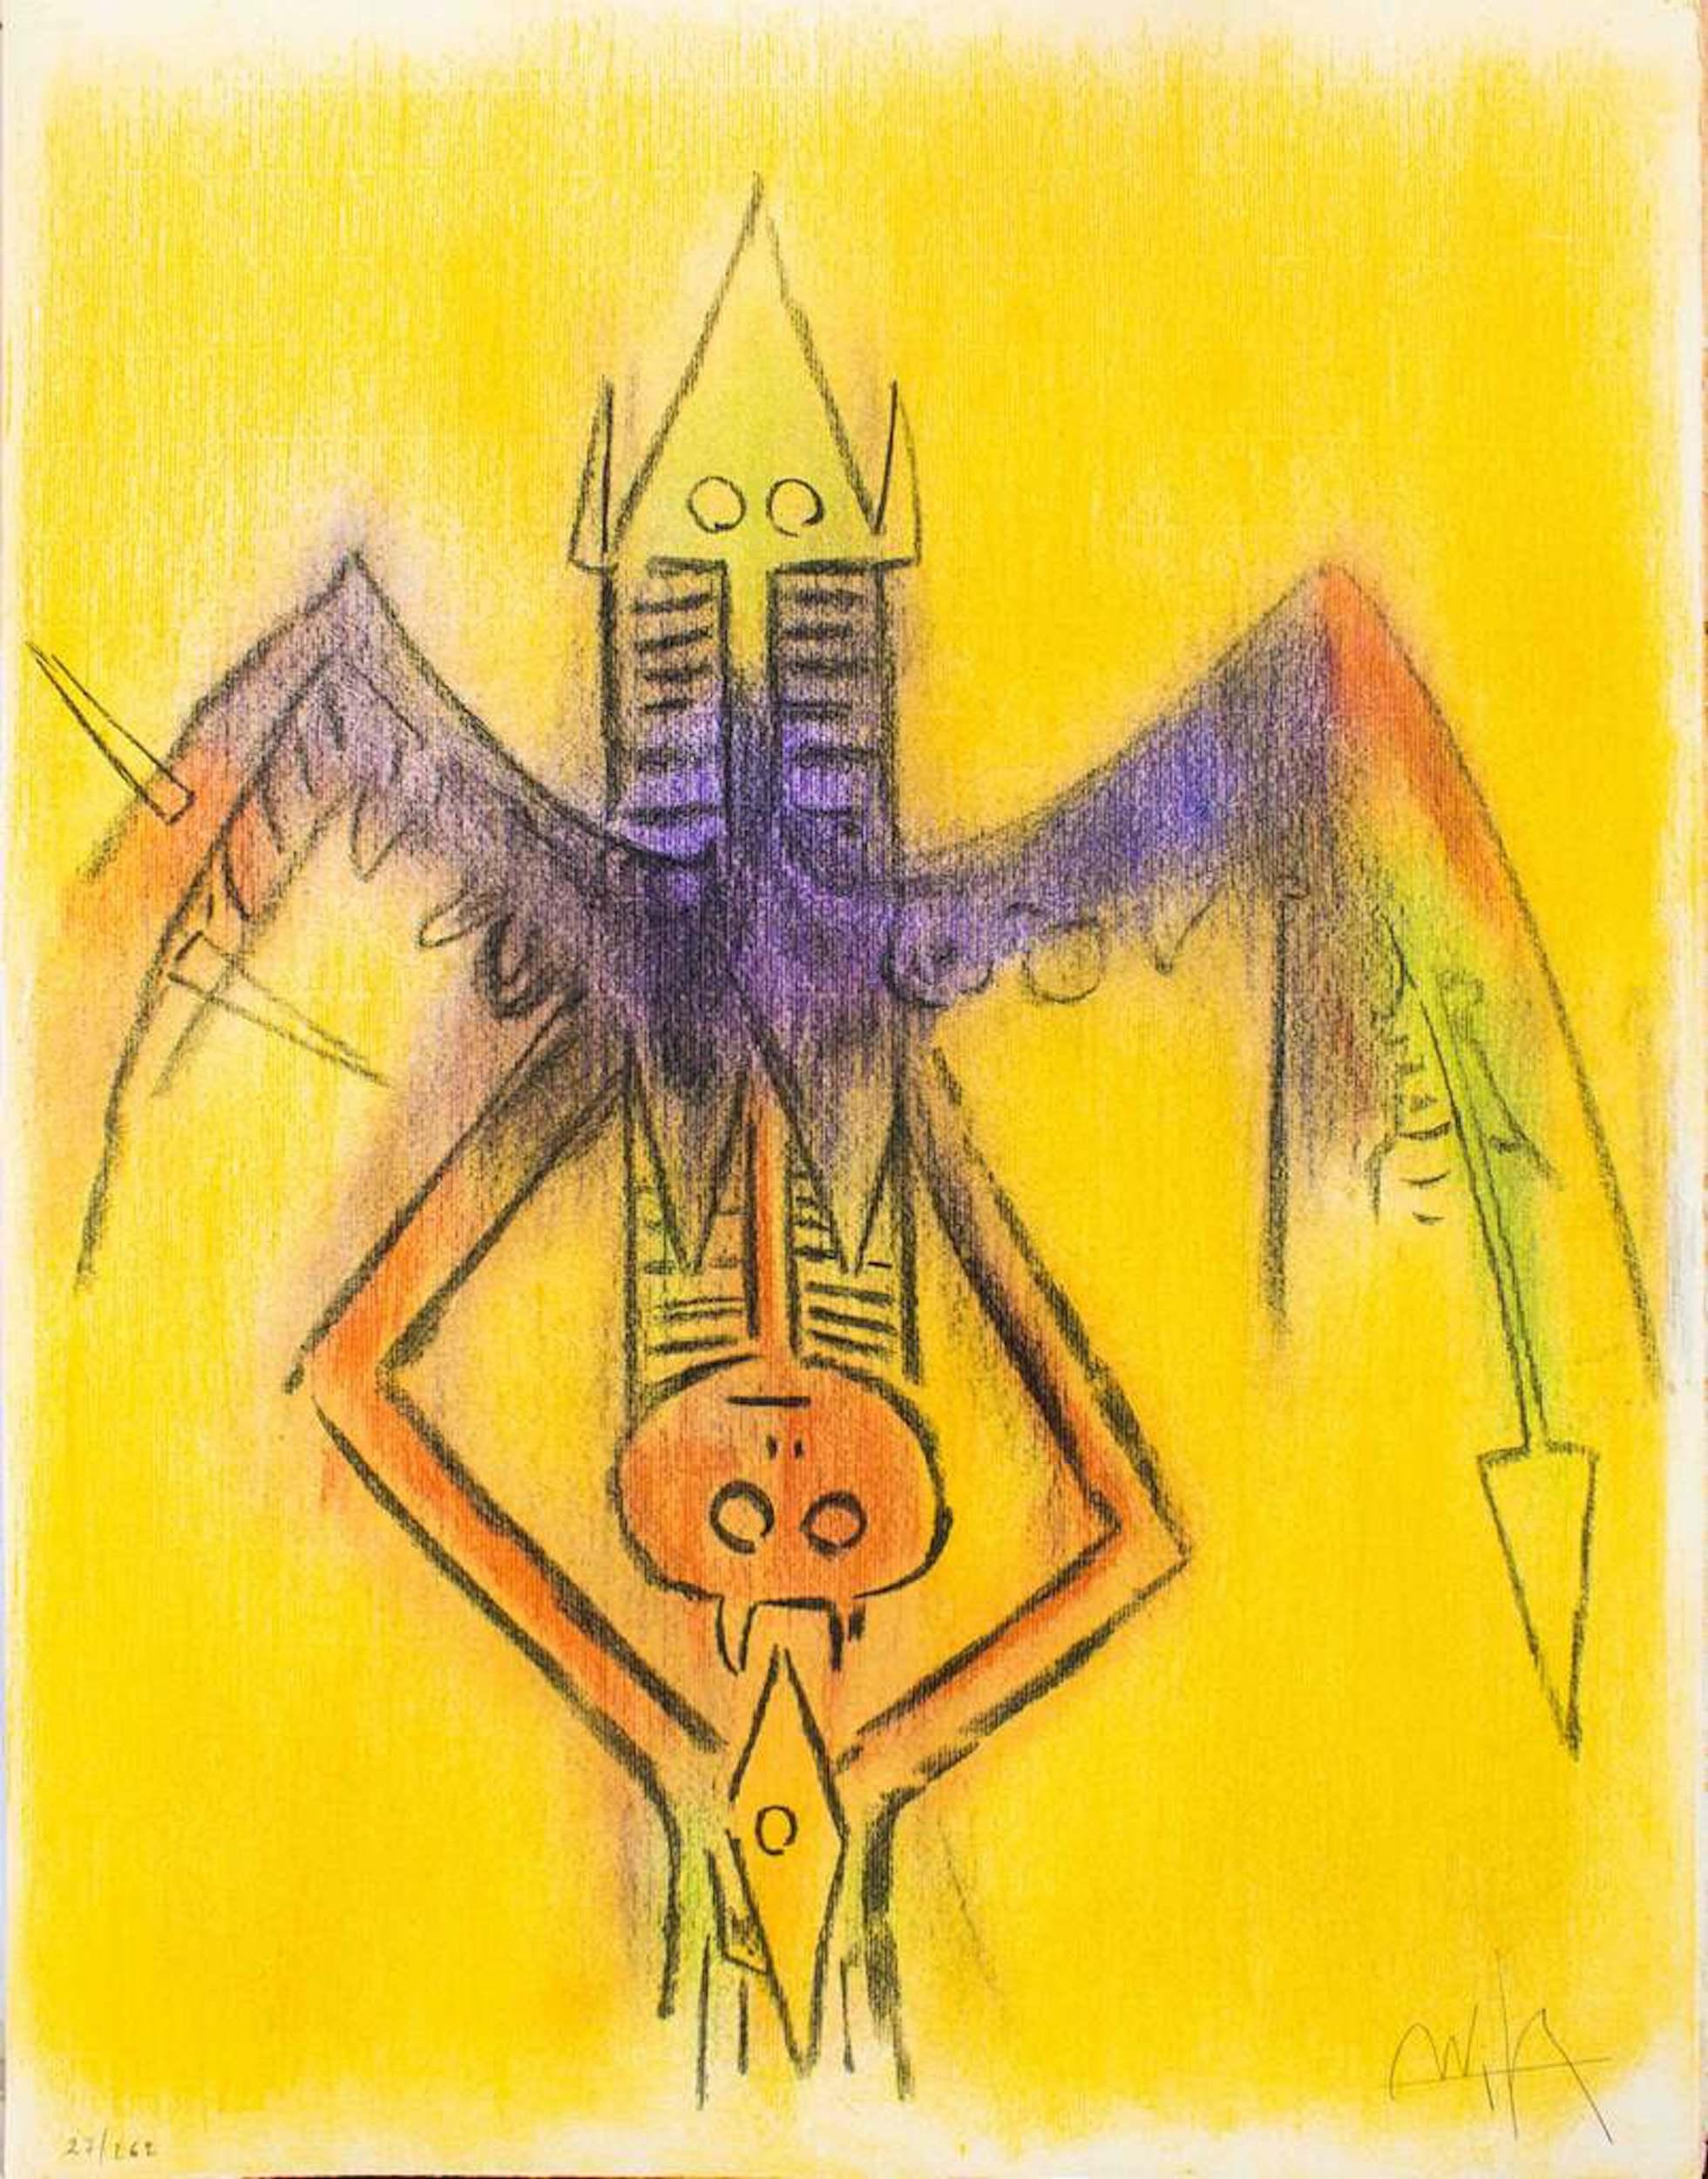 Hand signed. Edition of 262 prints.
Wifredo Lam was a Cuban artist inspired by and in contact with some of the most important artists of the 20th century. He was influenced by the Surrealism in many of his productions.

Very good conditions.